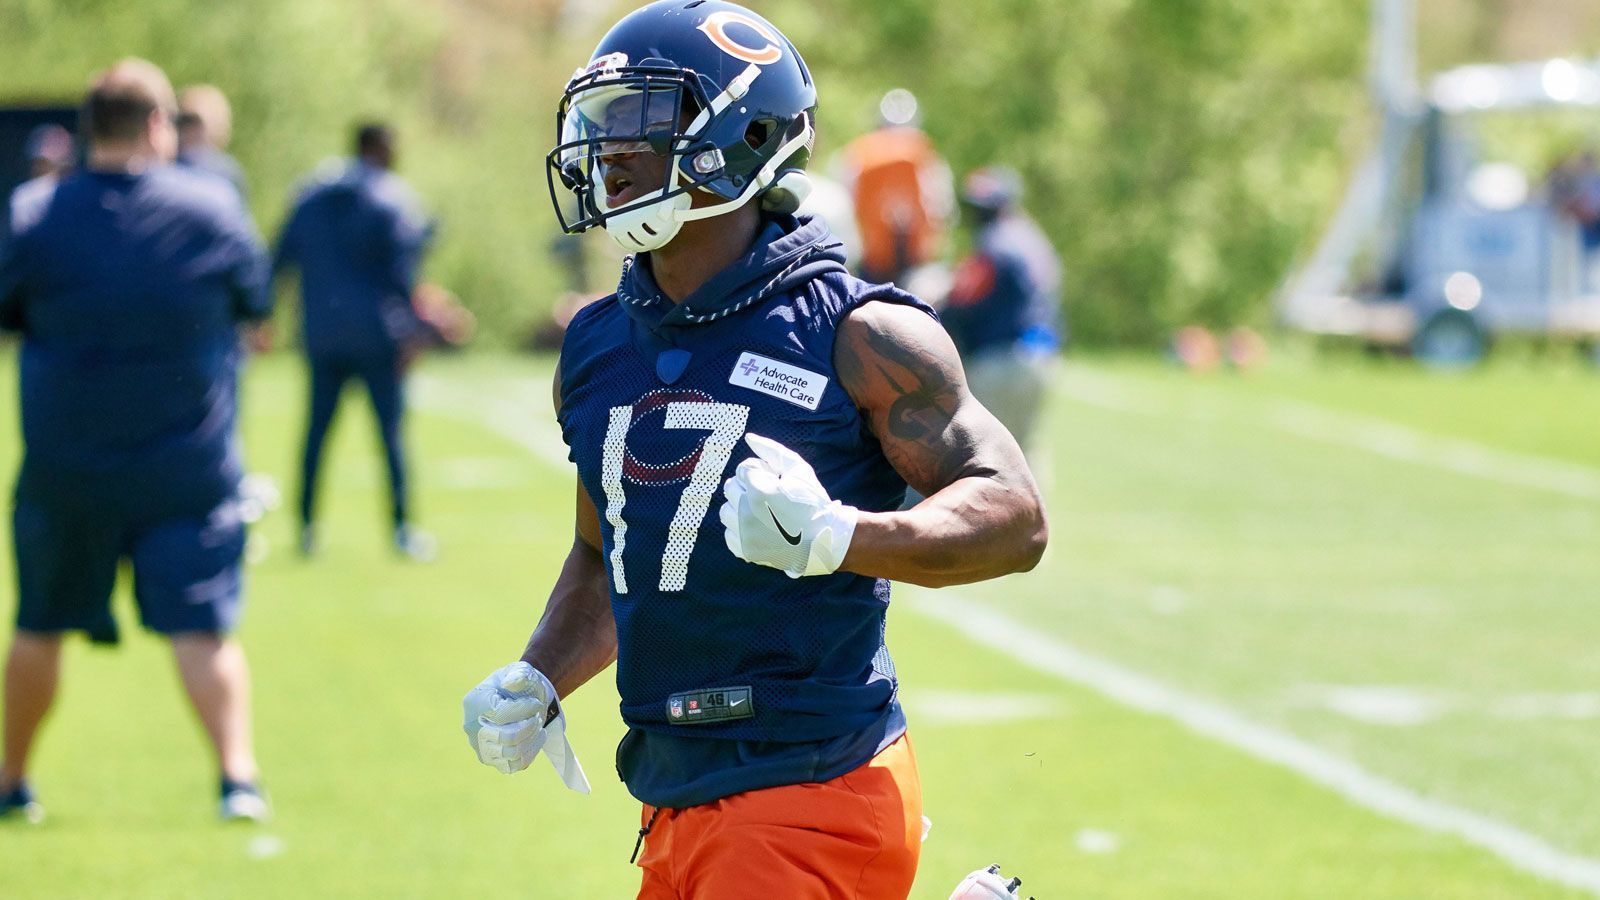 
                <strong>Die Top 5 Receiver in Madden 19</strong><br>
                Platz 5: Anthony Miller, Chicago Bears: 74
              